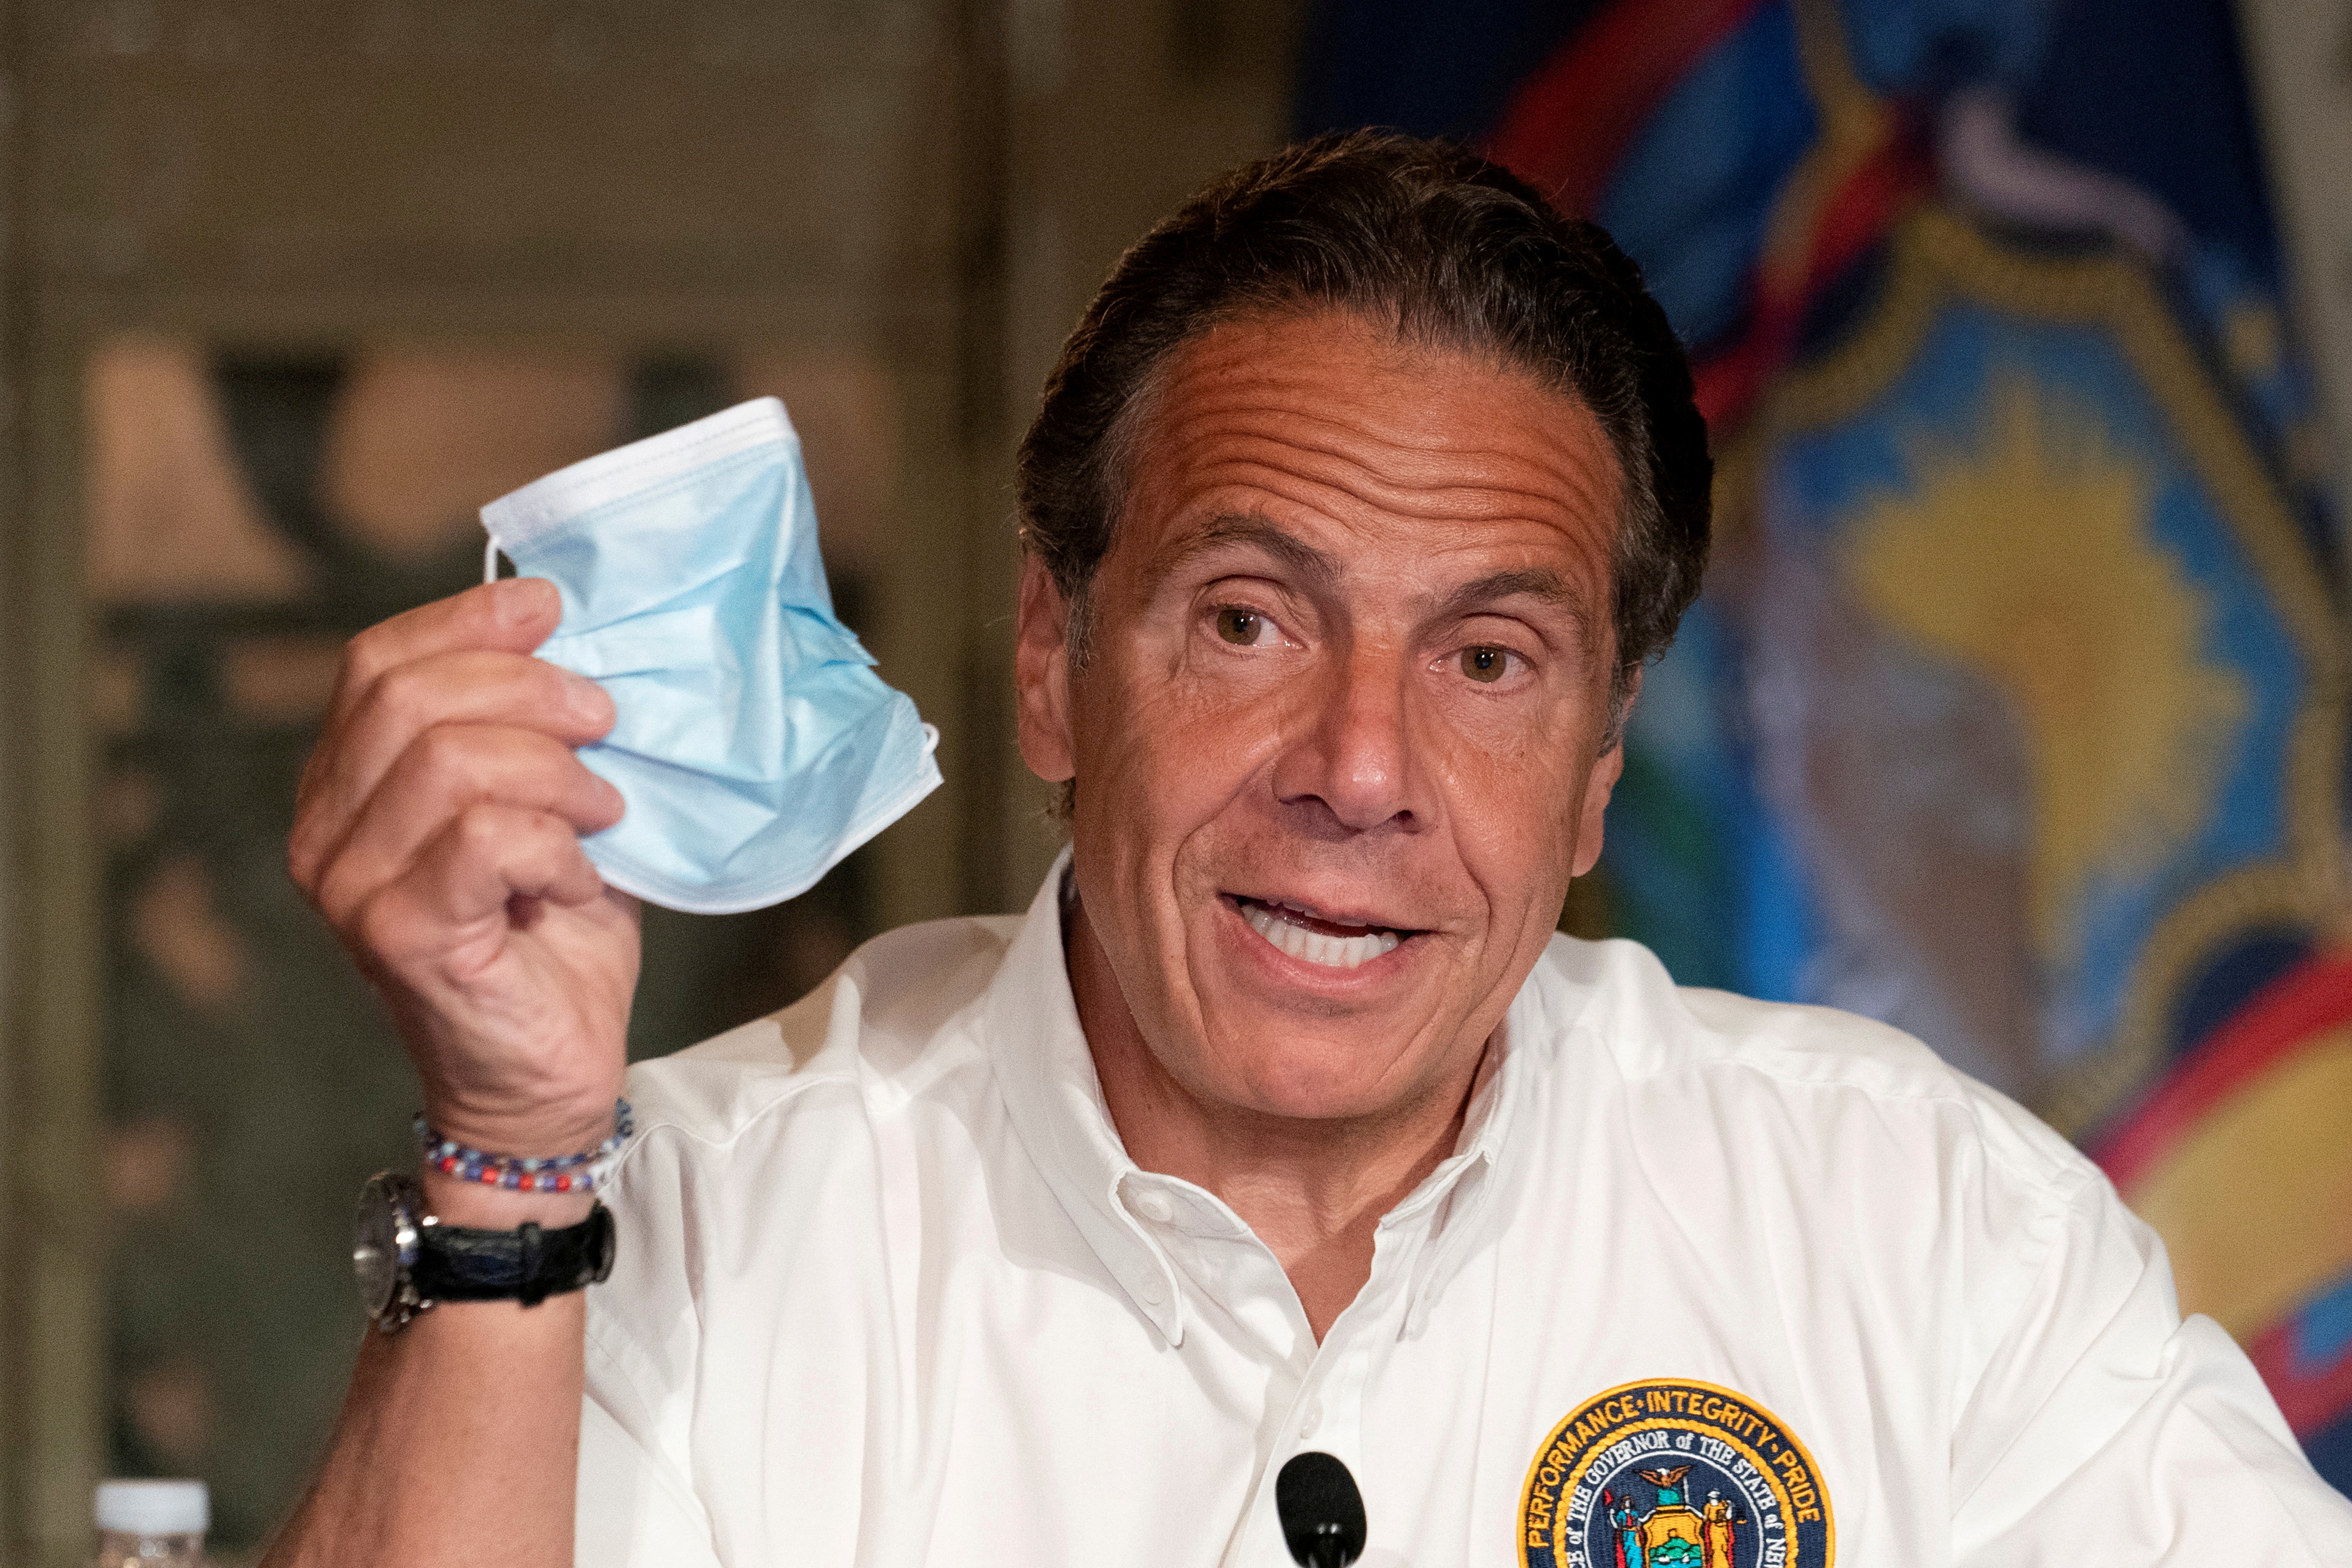 New York Governor Andrew Cuomo discusses the wearing of masks as he speaks at a news conference in New York